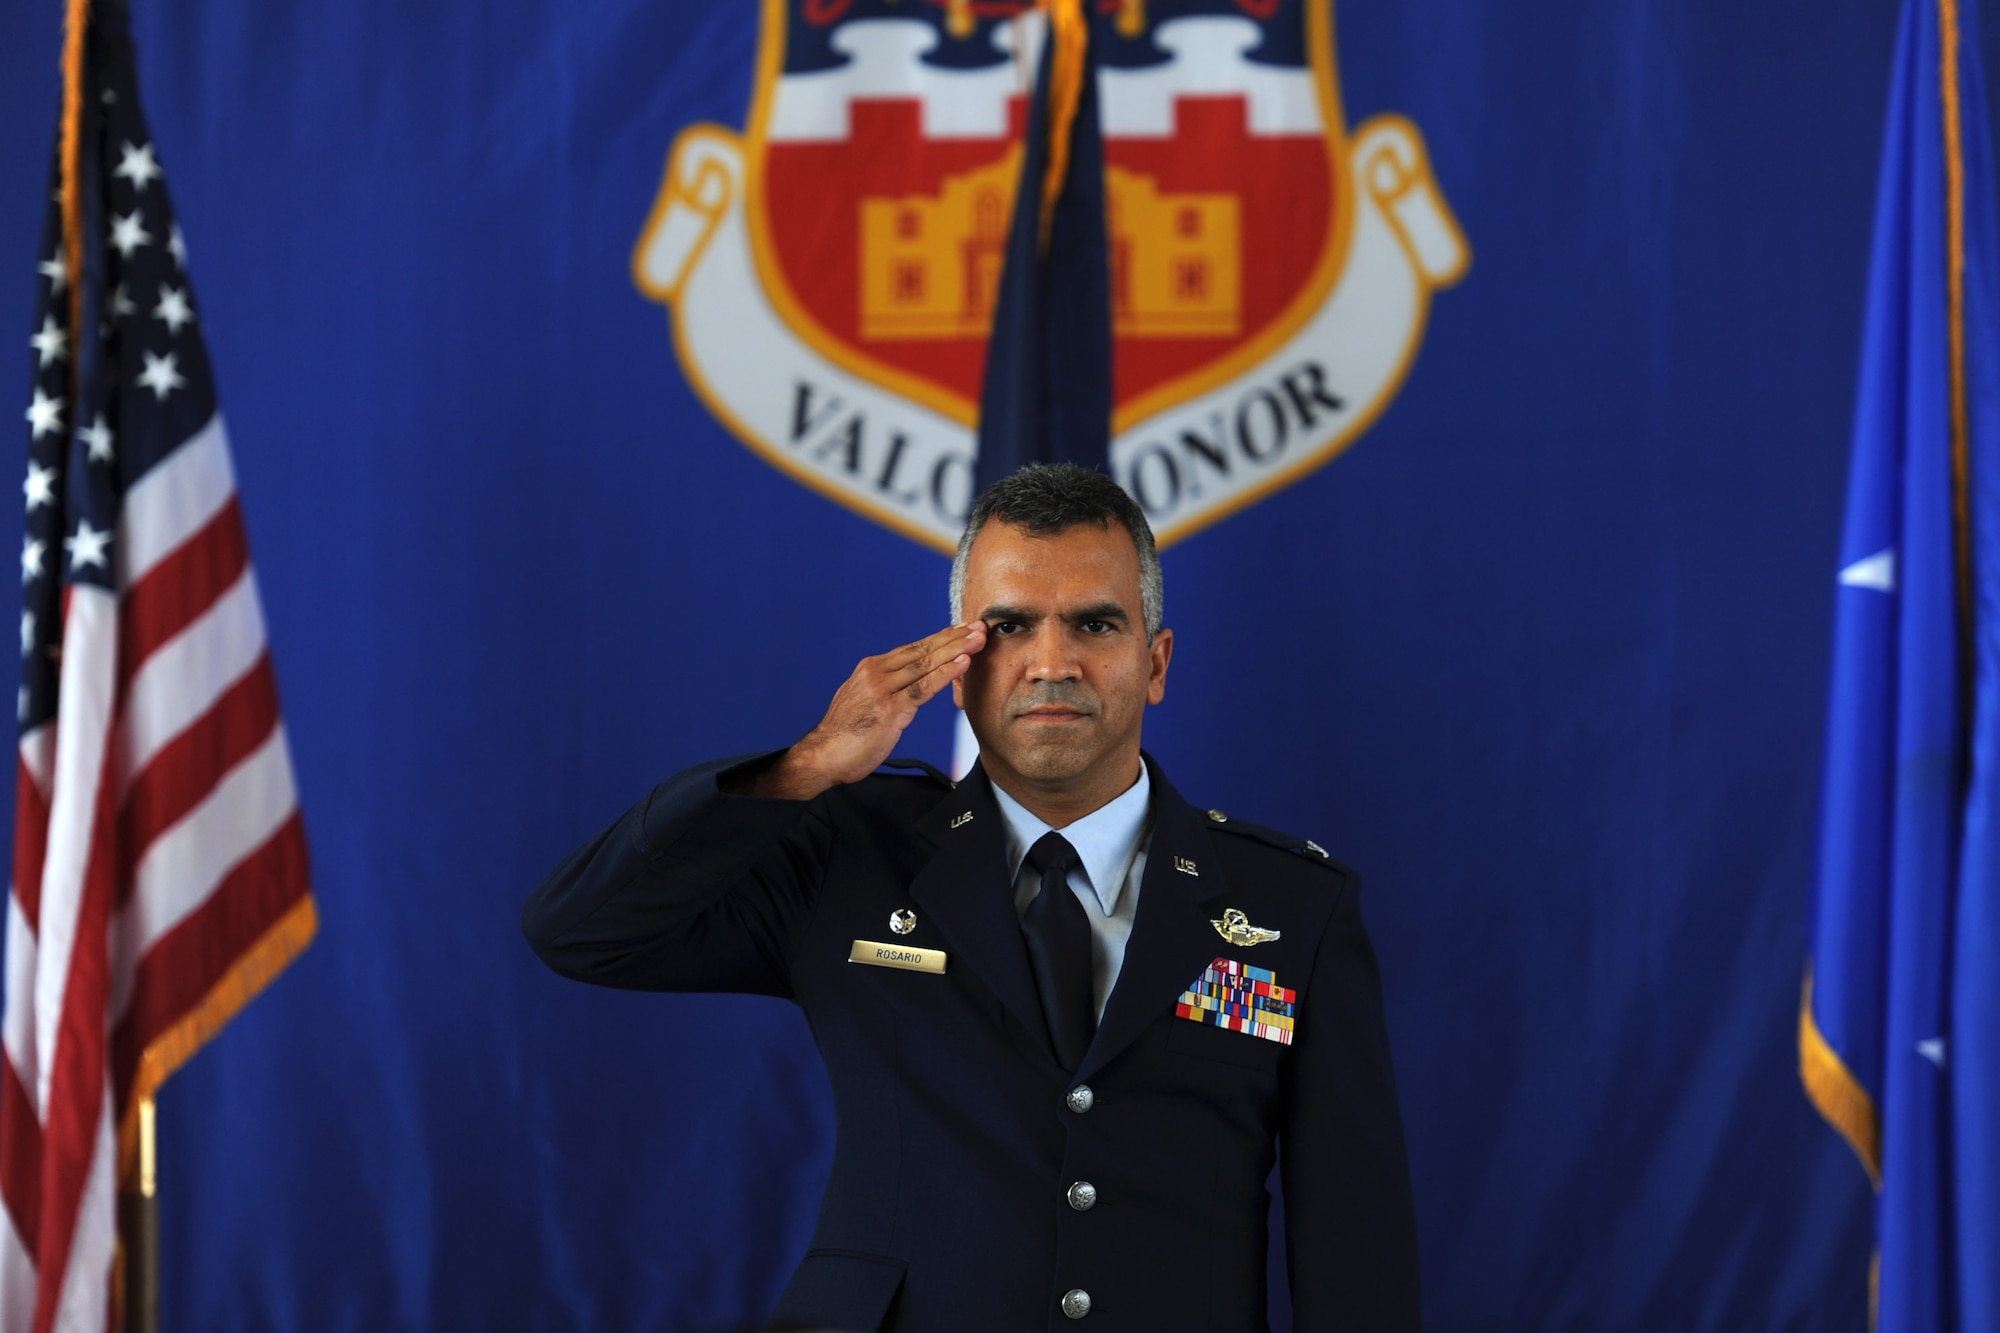 Col. Raul Rosario receives his first salute as commander of the 149th Fighter Wing.